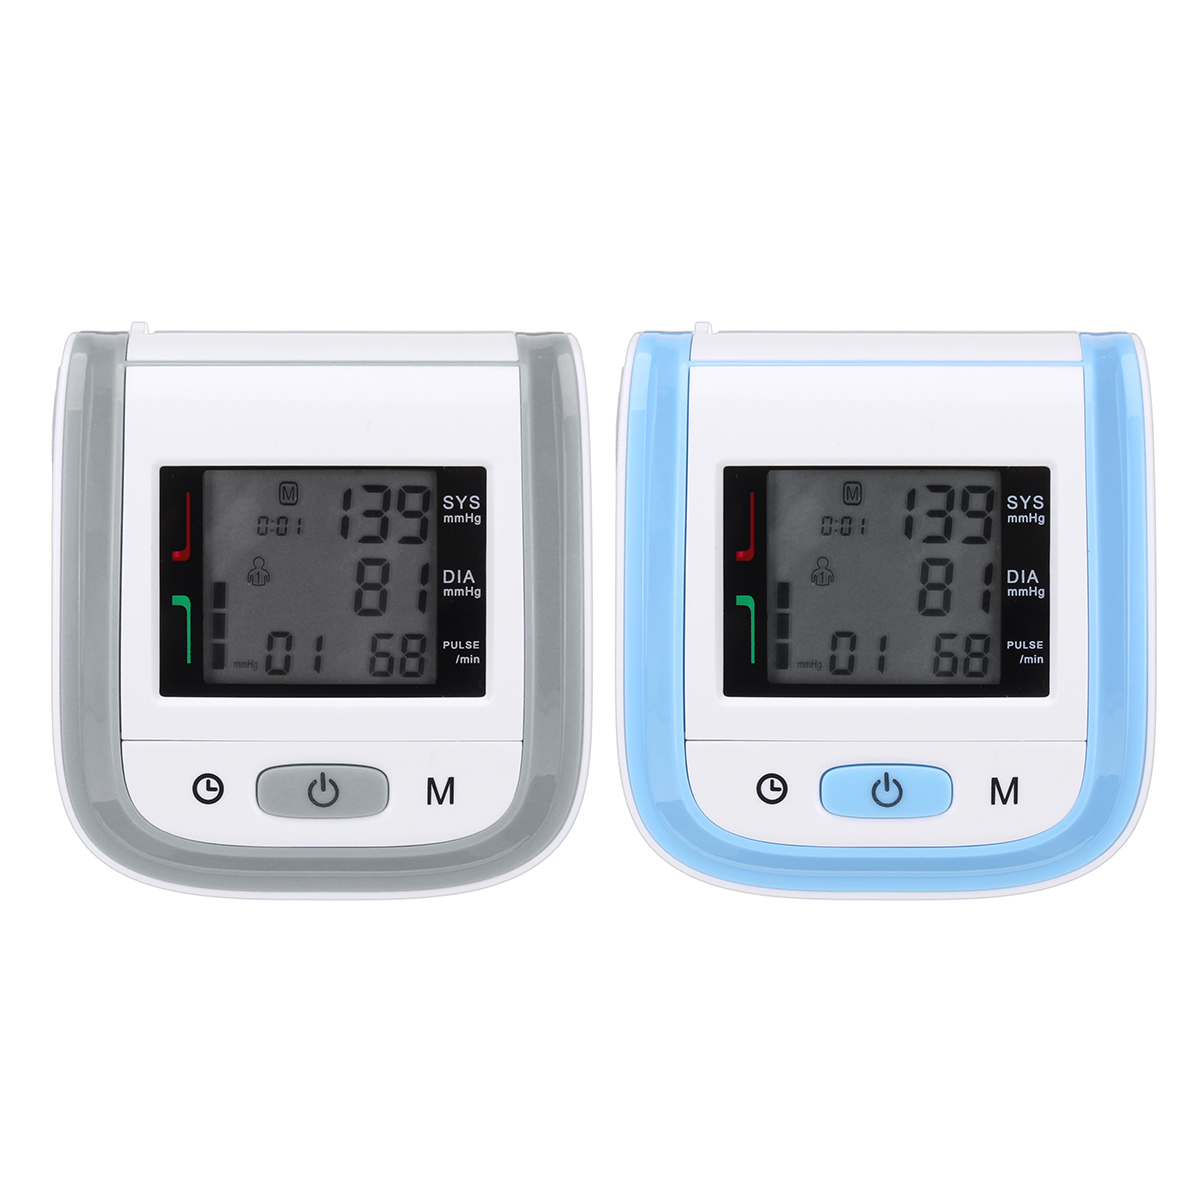 Digital-Thermometer-Fingertip-Pulse-Oximeter-Wrist-Blood-Pressure-Monitor-Infrared-Body-Thermometer-1400377